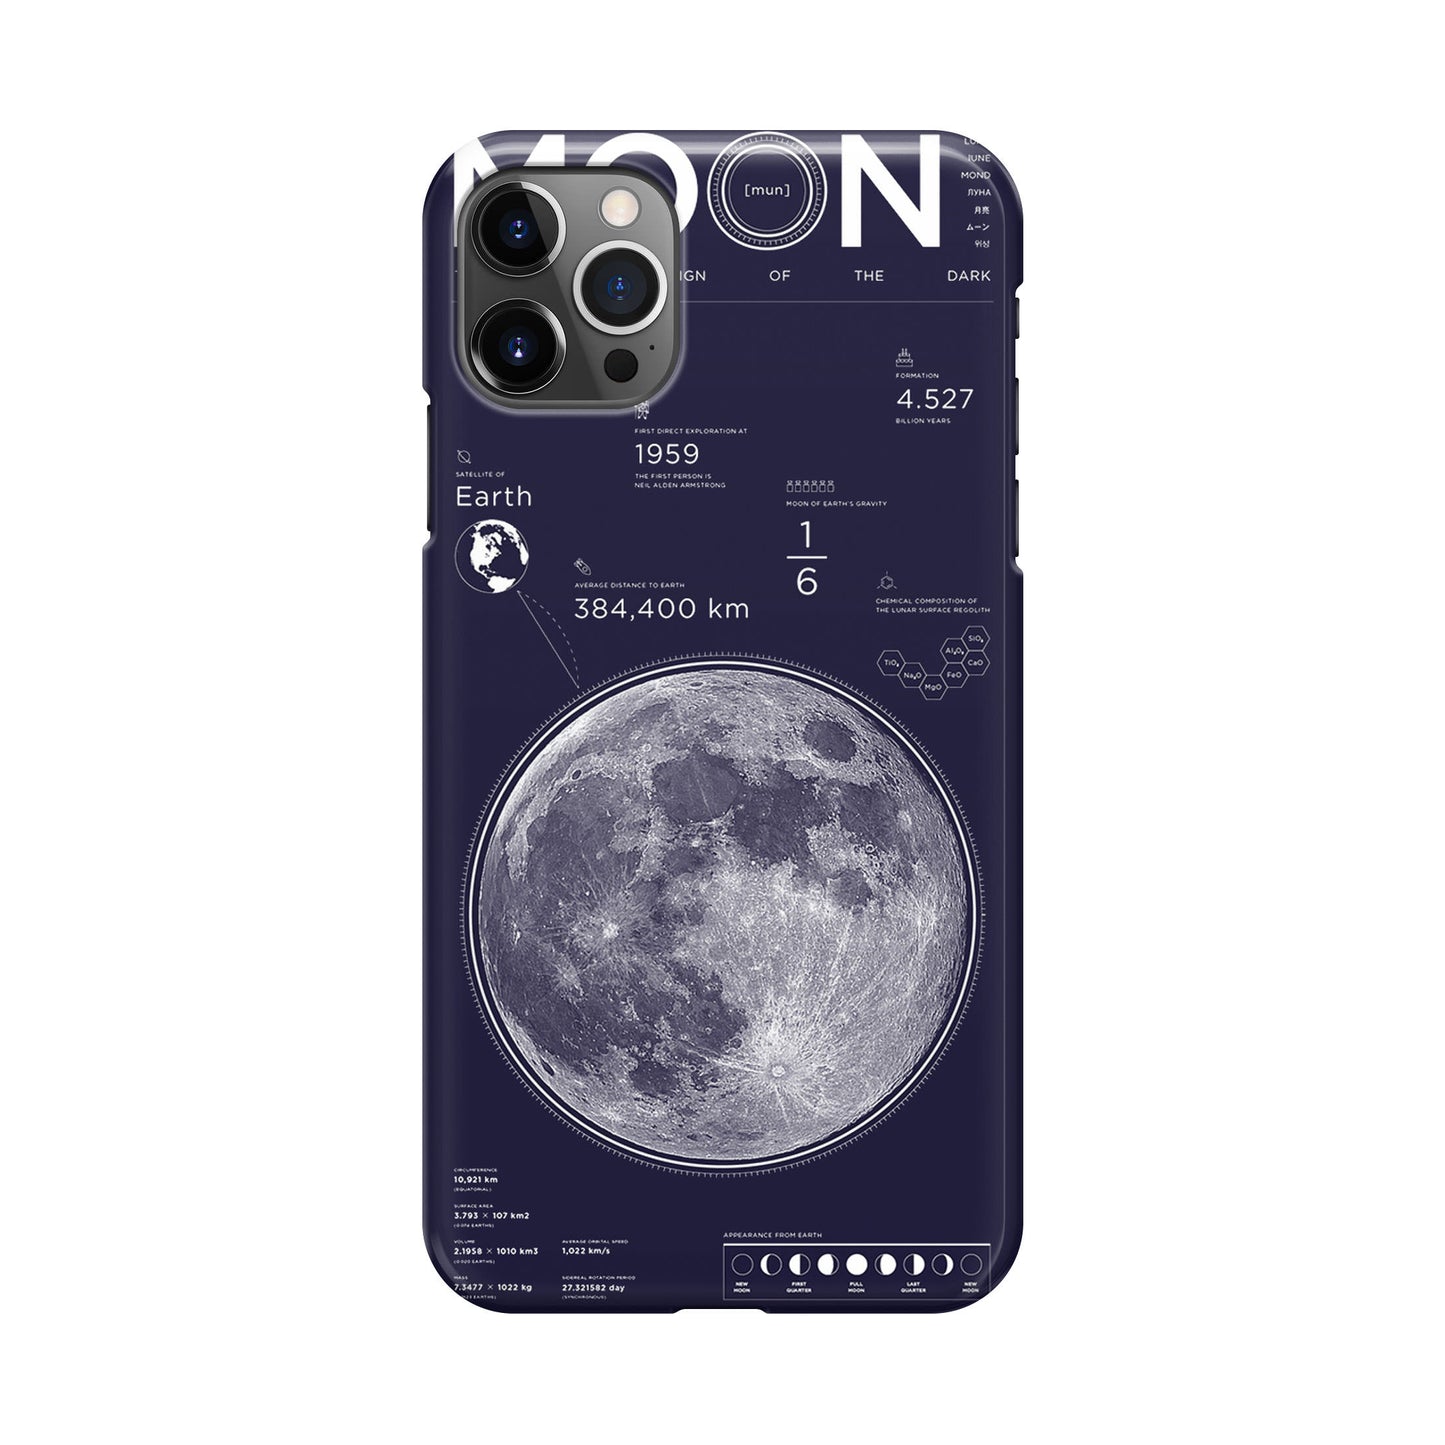 The Moon iPhone 12 Pro Max Case